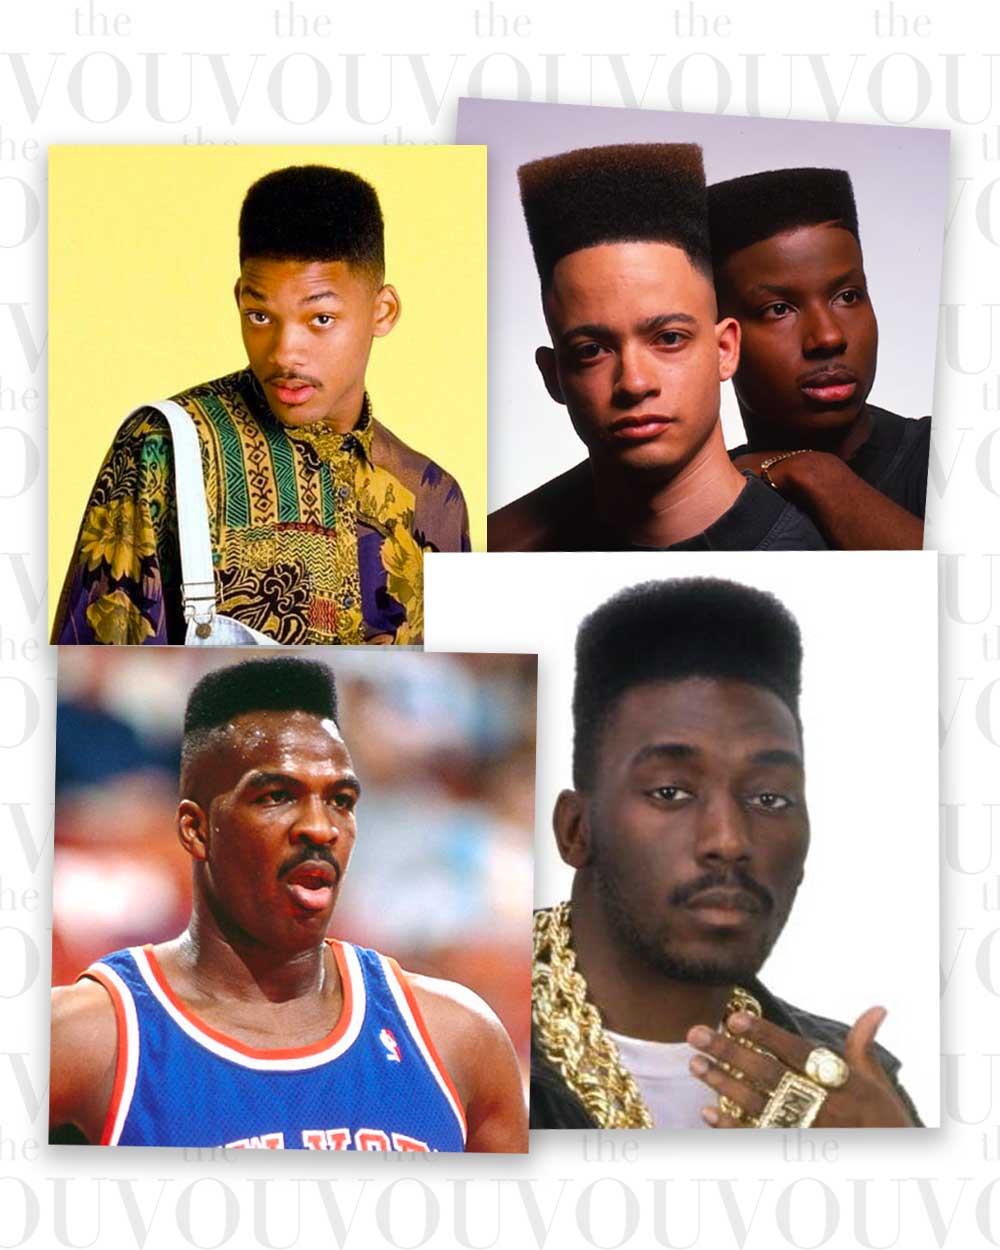 Flat Tops 90s fashion trends - 1990s flattop haircut, nineties flat top hairstyle, 90 fashion decade